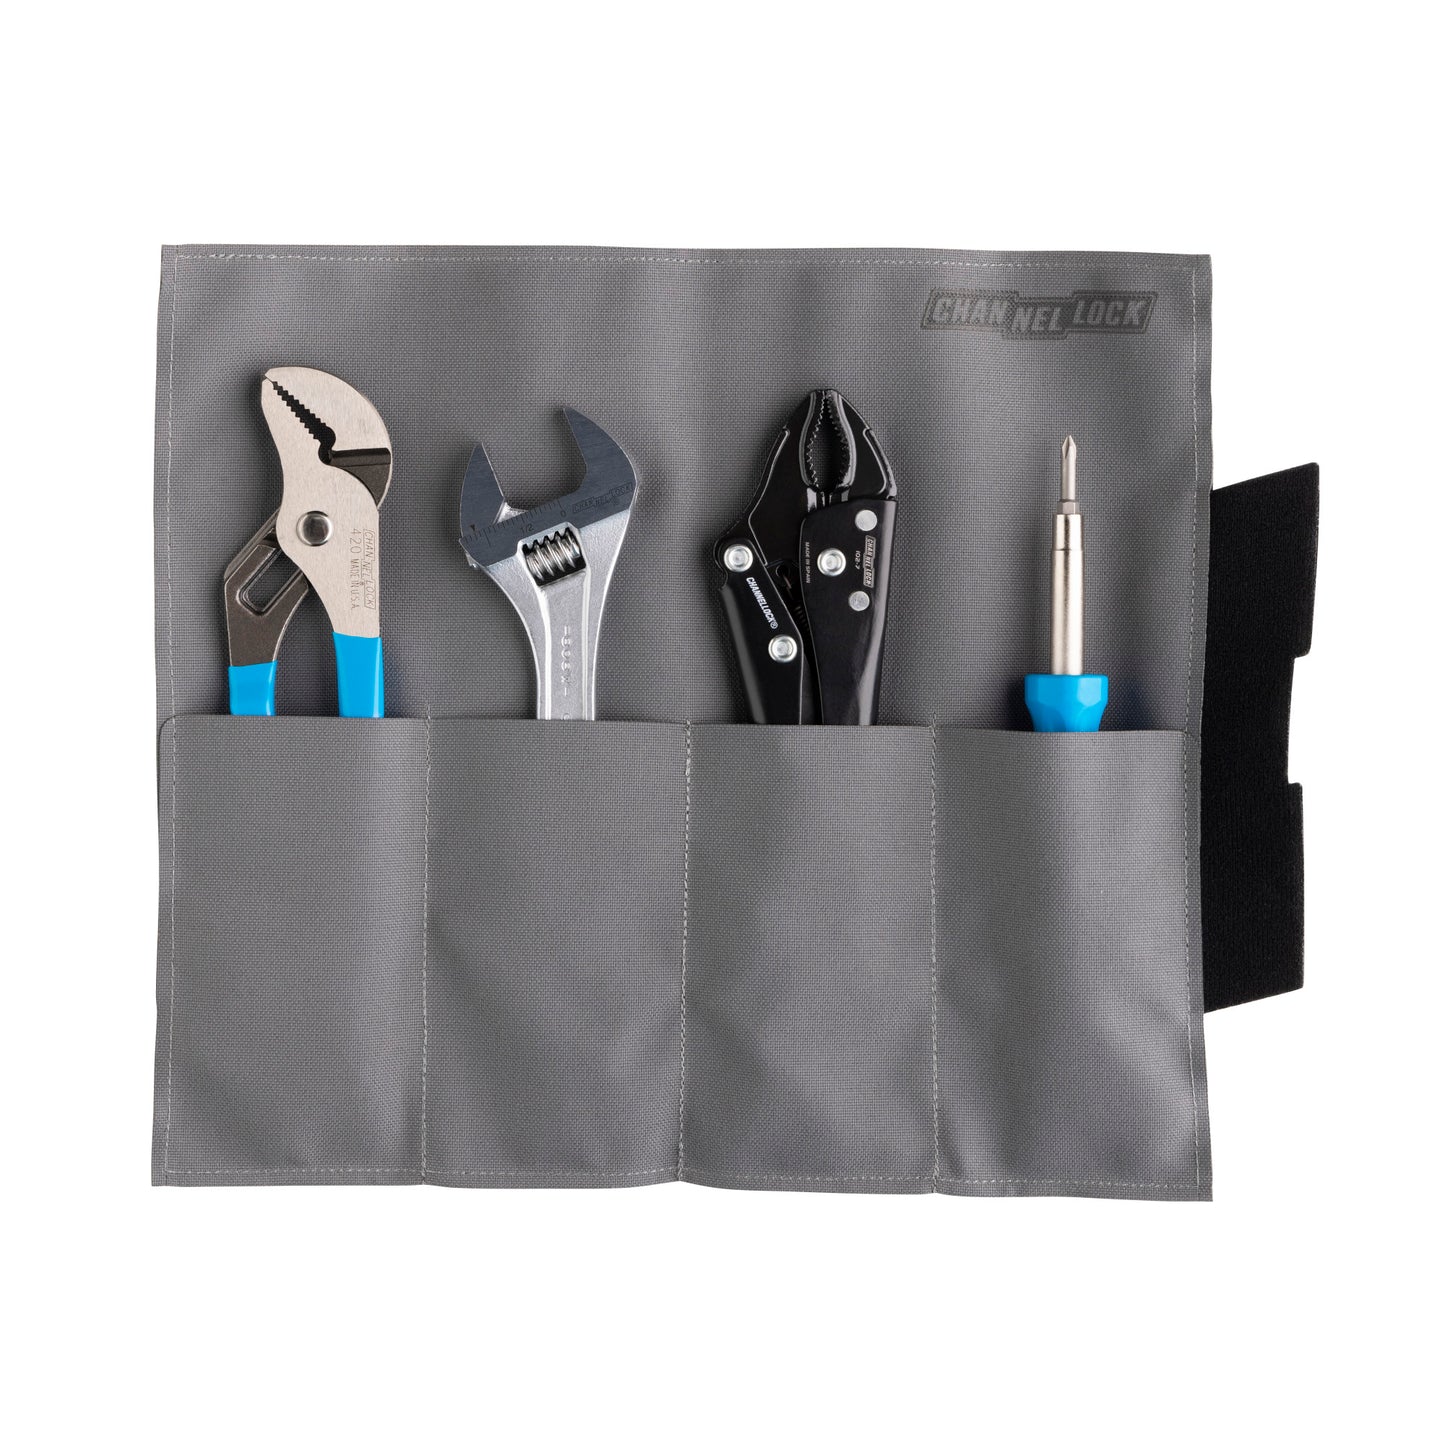 TOOL ROLL-42 4-piece Tool Set with Tool Roll